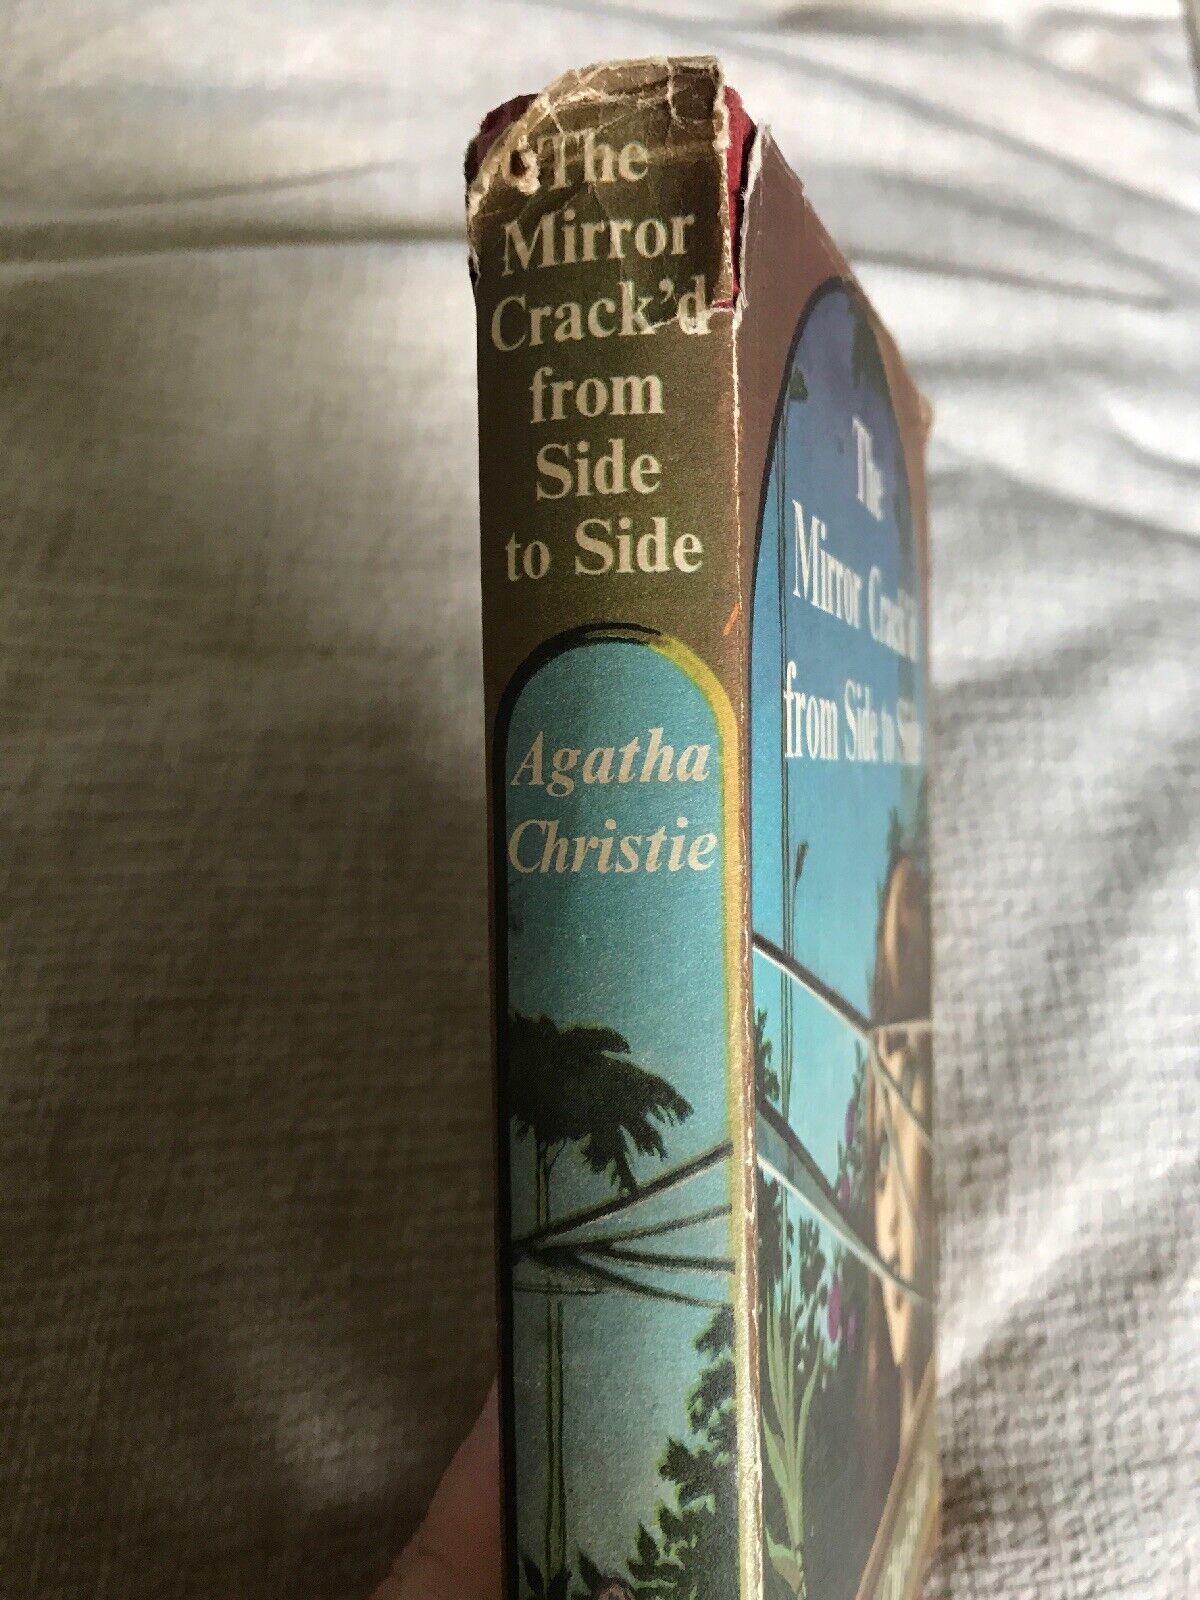 Vintage AGATHA CHRISTIE THE MIRROR CRACK'D FROM SIDE TO SIDE HB BOOK CLUB 1962